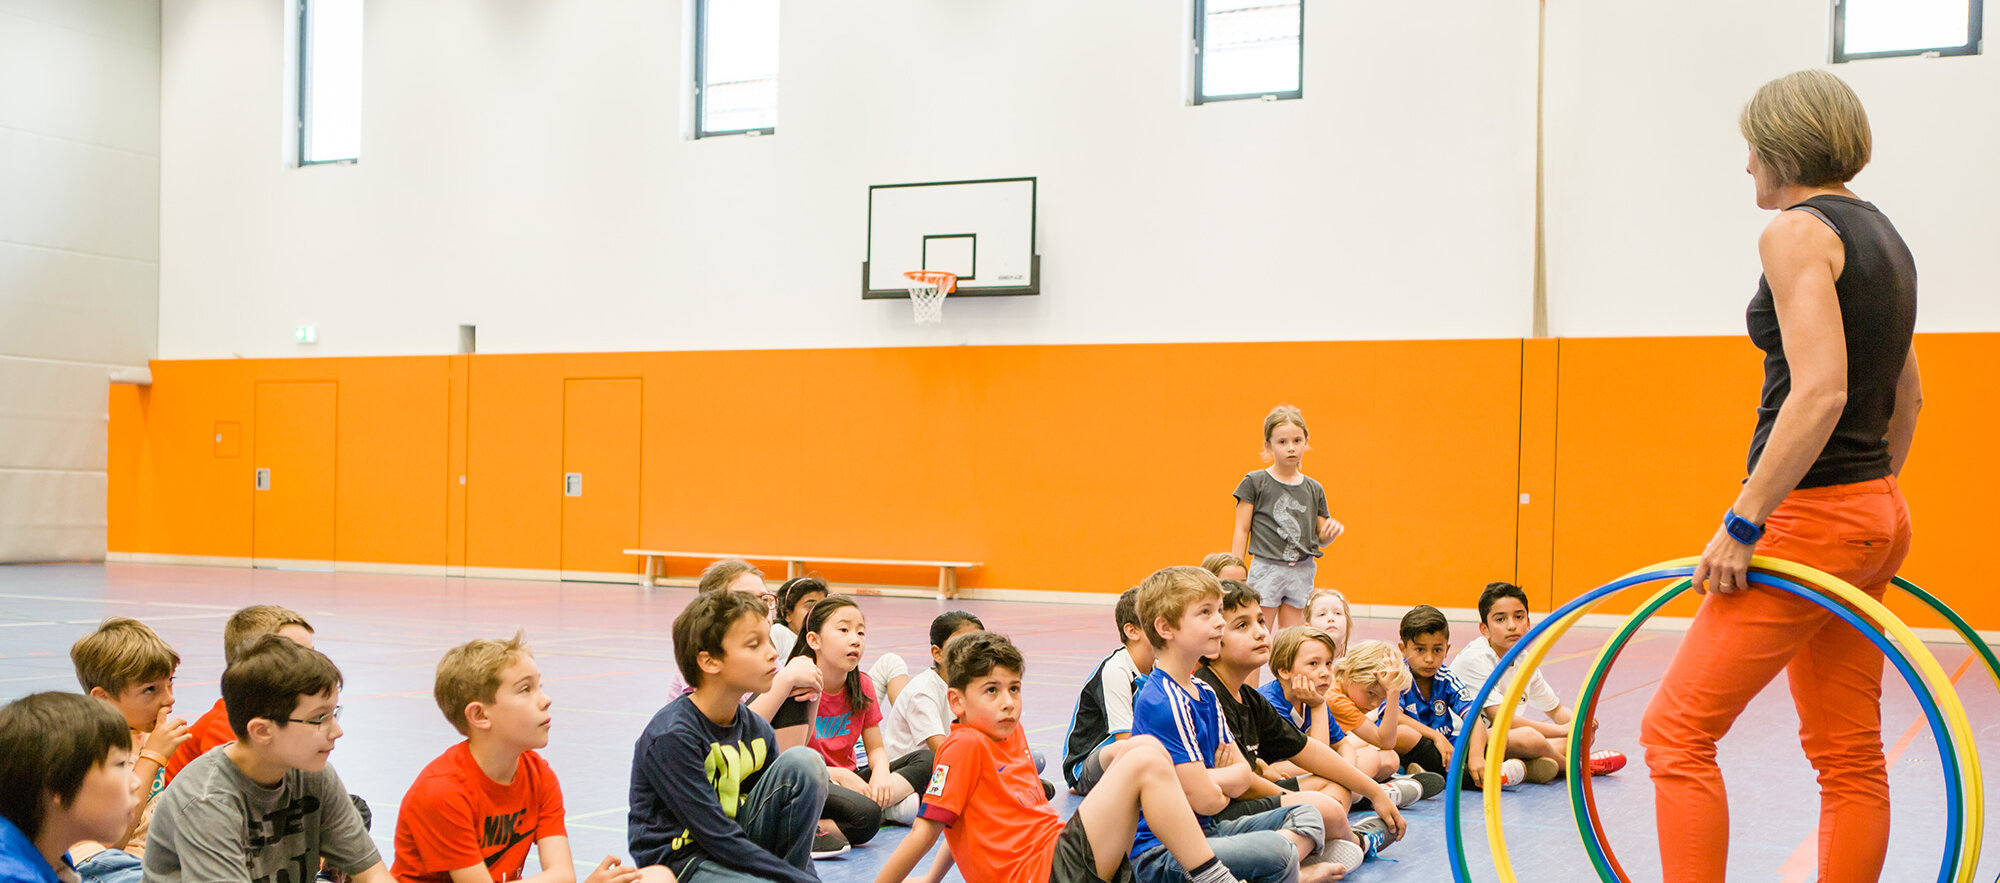 Children are sitting on the floor in the sports hall. The teacher is standing in front of them with colourful hoops in her hand.